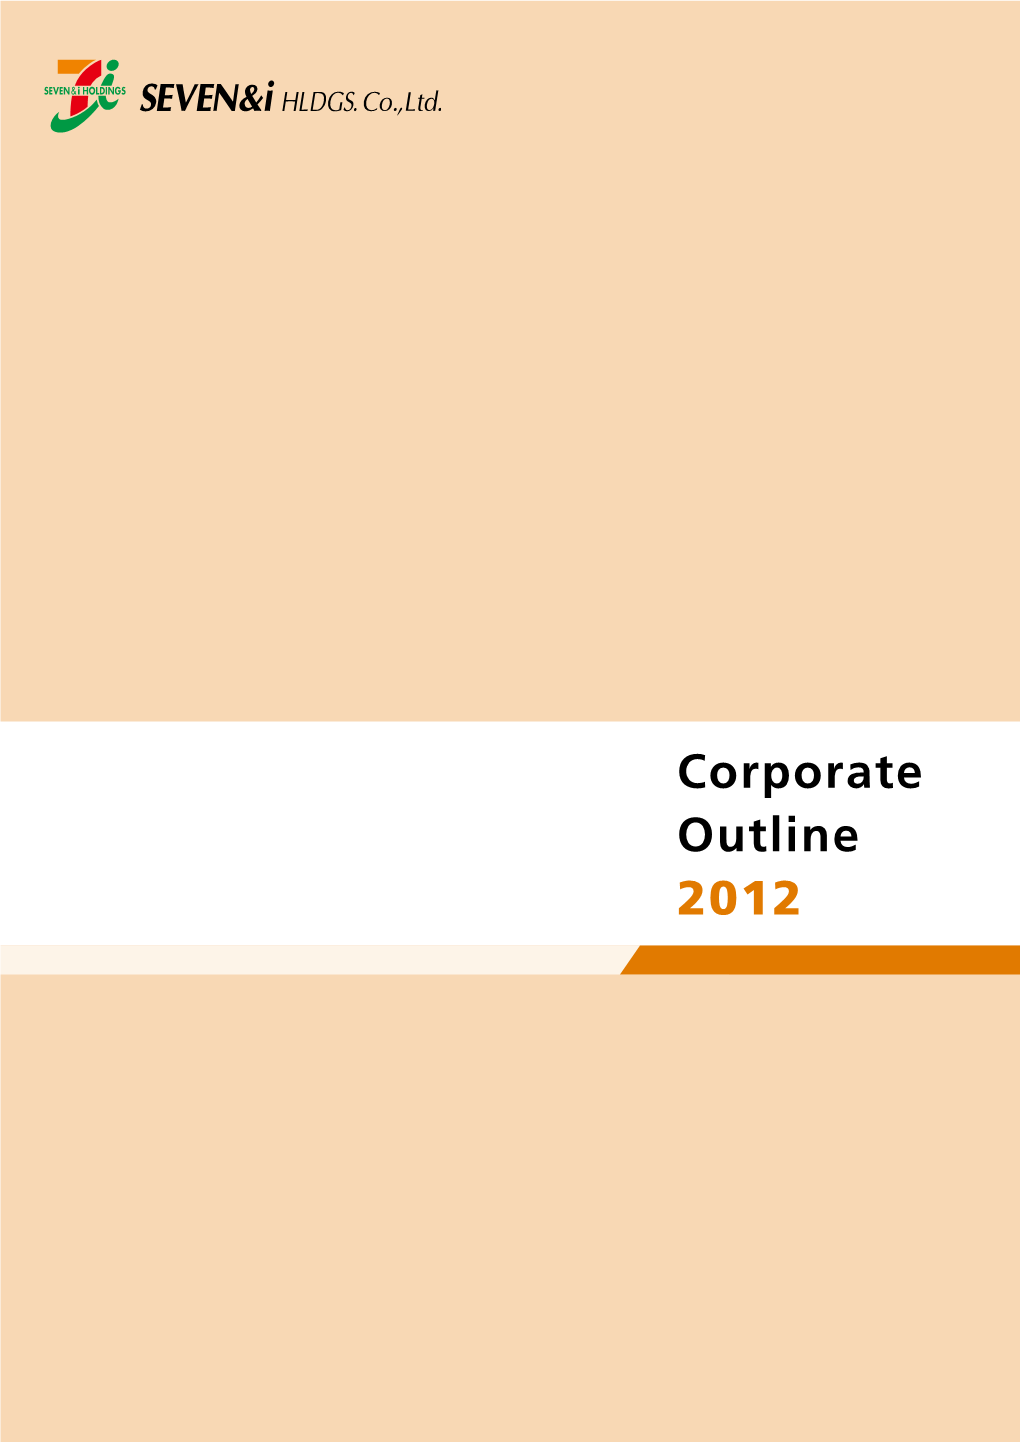 Corporate Outline 2012